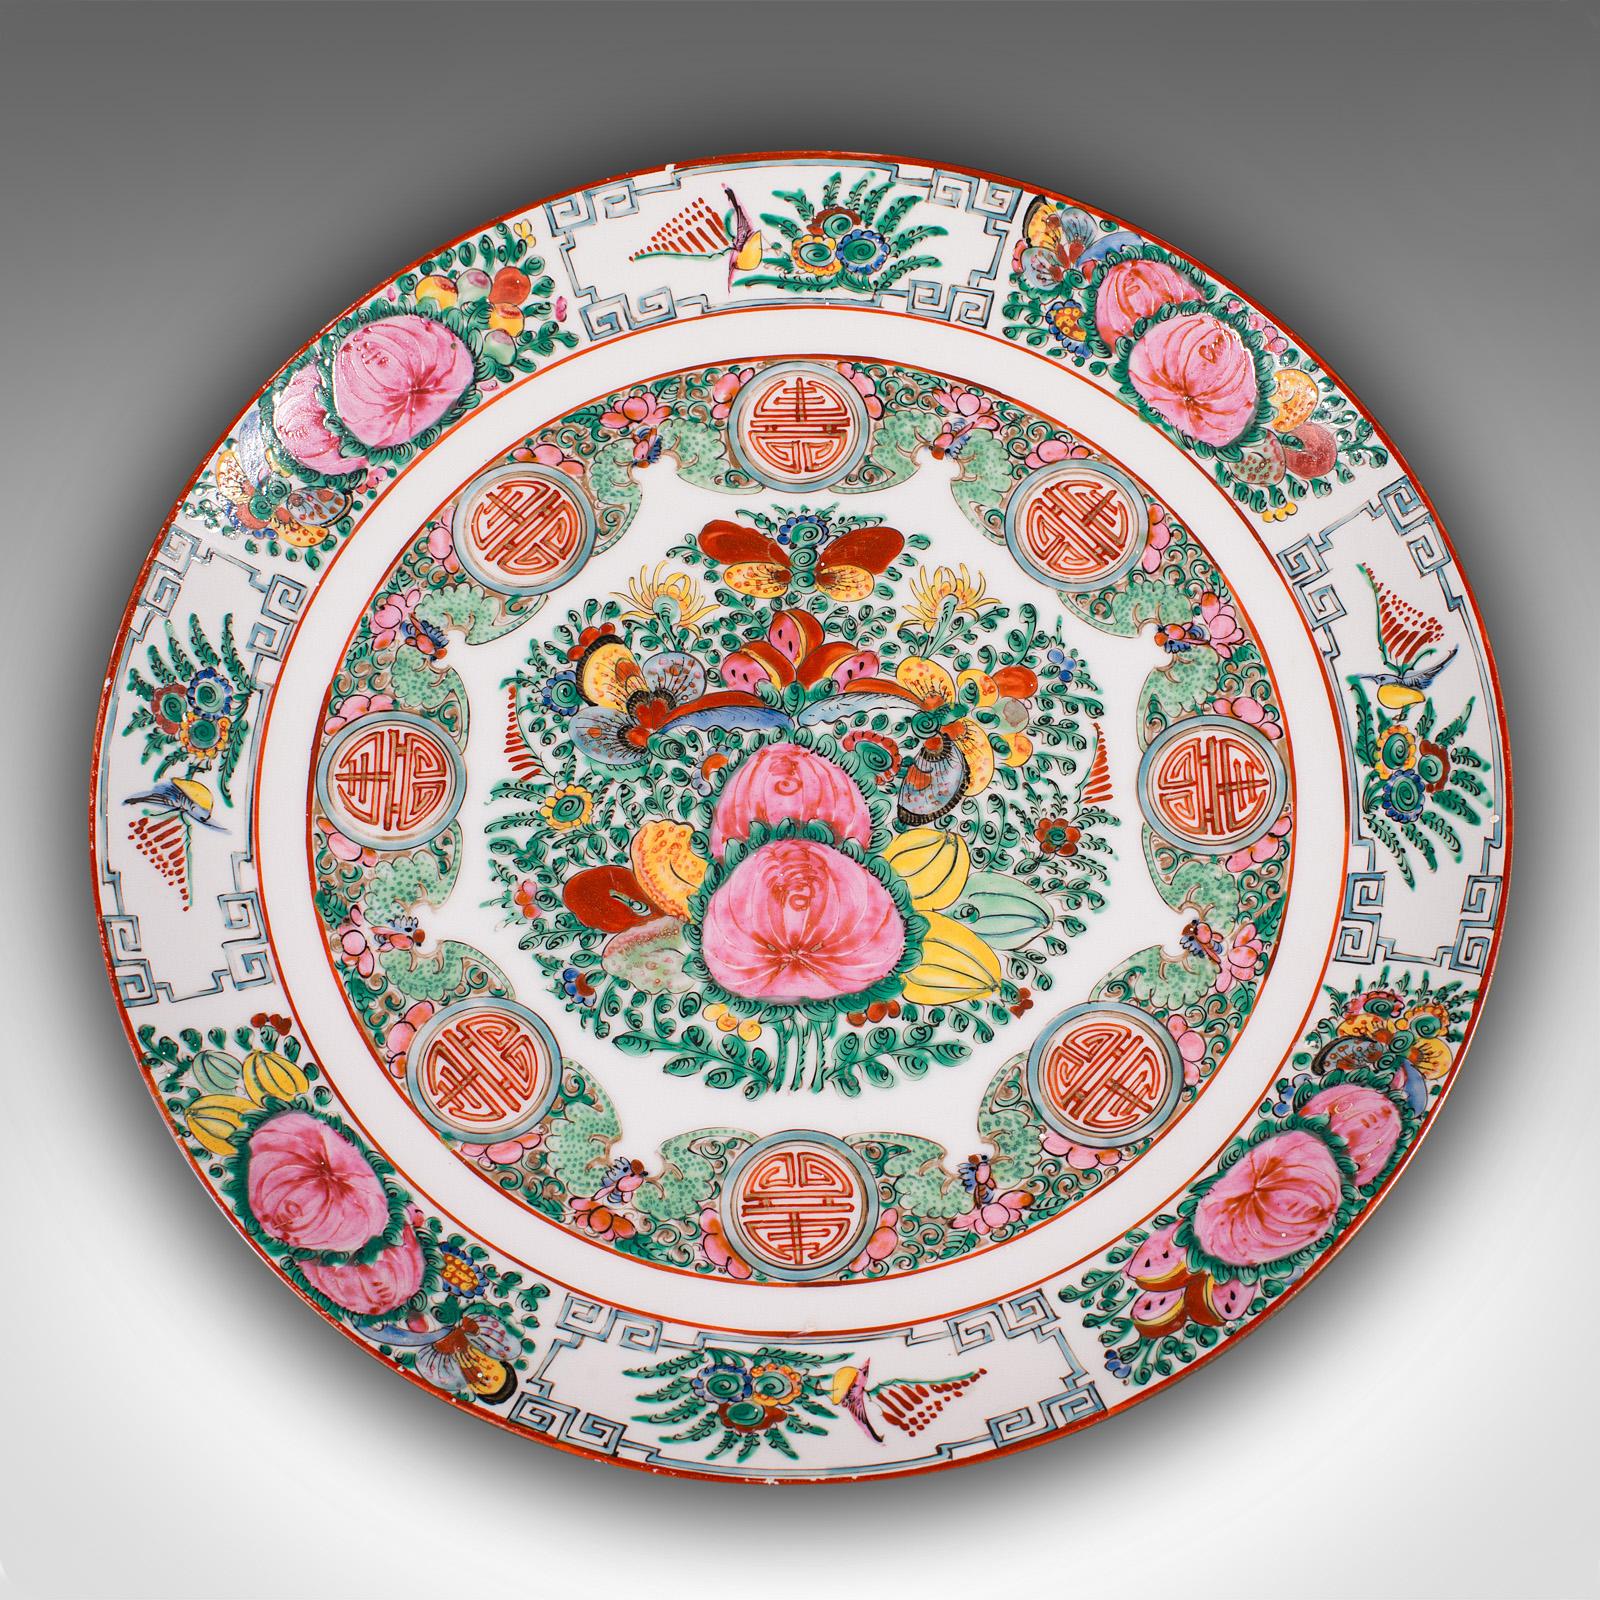 Antique Celebration Plate, Chinese, Ceramic, Decorative Charger, Victorian, Qing In Good Condition For Sale In Hele, Devon, GB